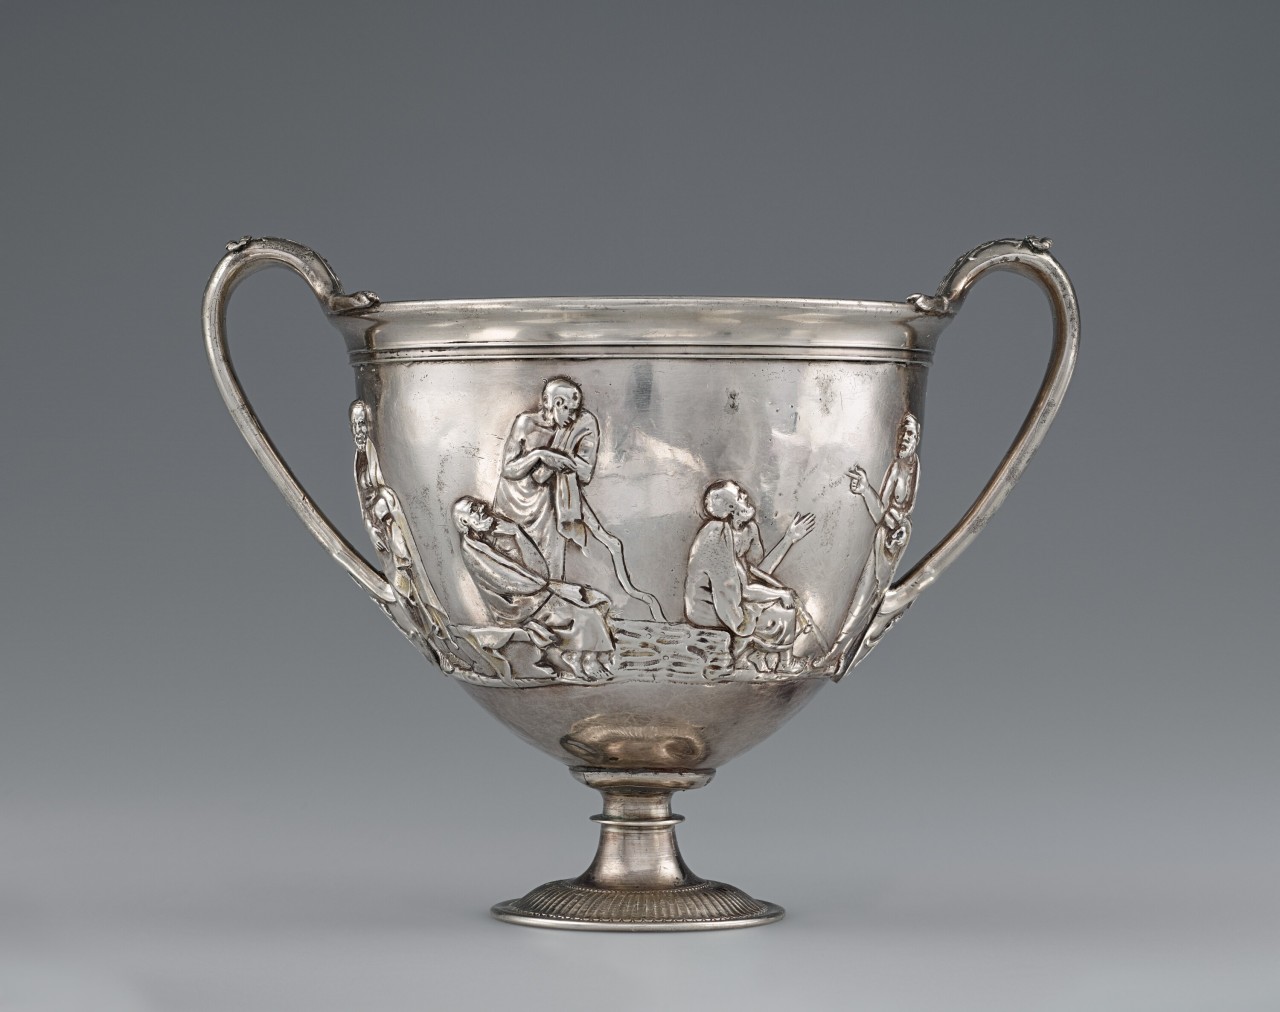 Relief-decorated silver cup, Roman, 1st century BC - 1st century AD, from the J. Paul Getty Museum.jpg